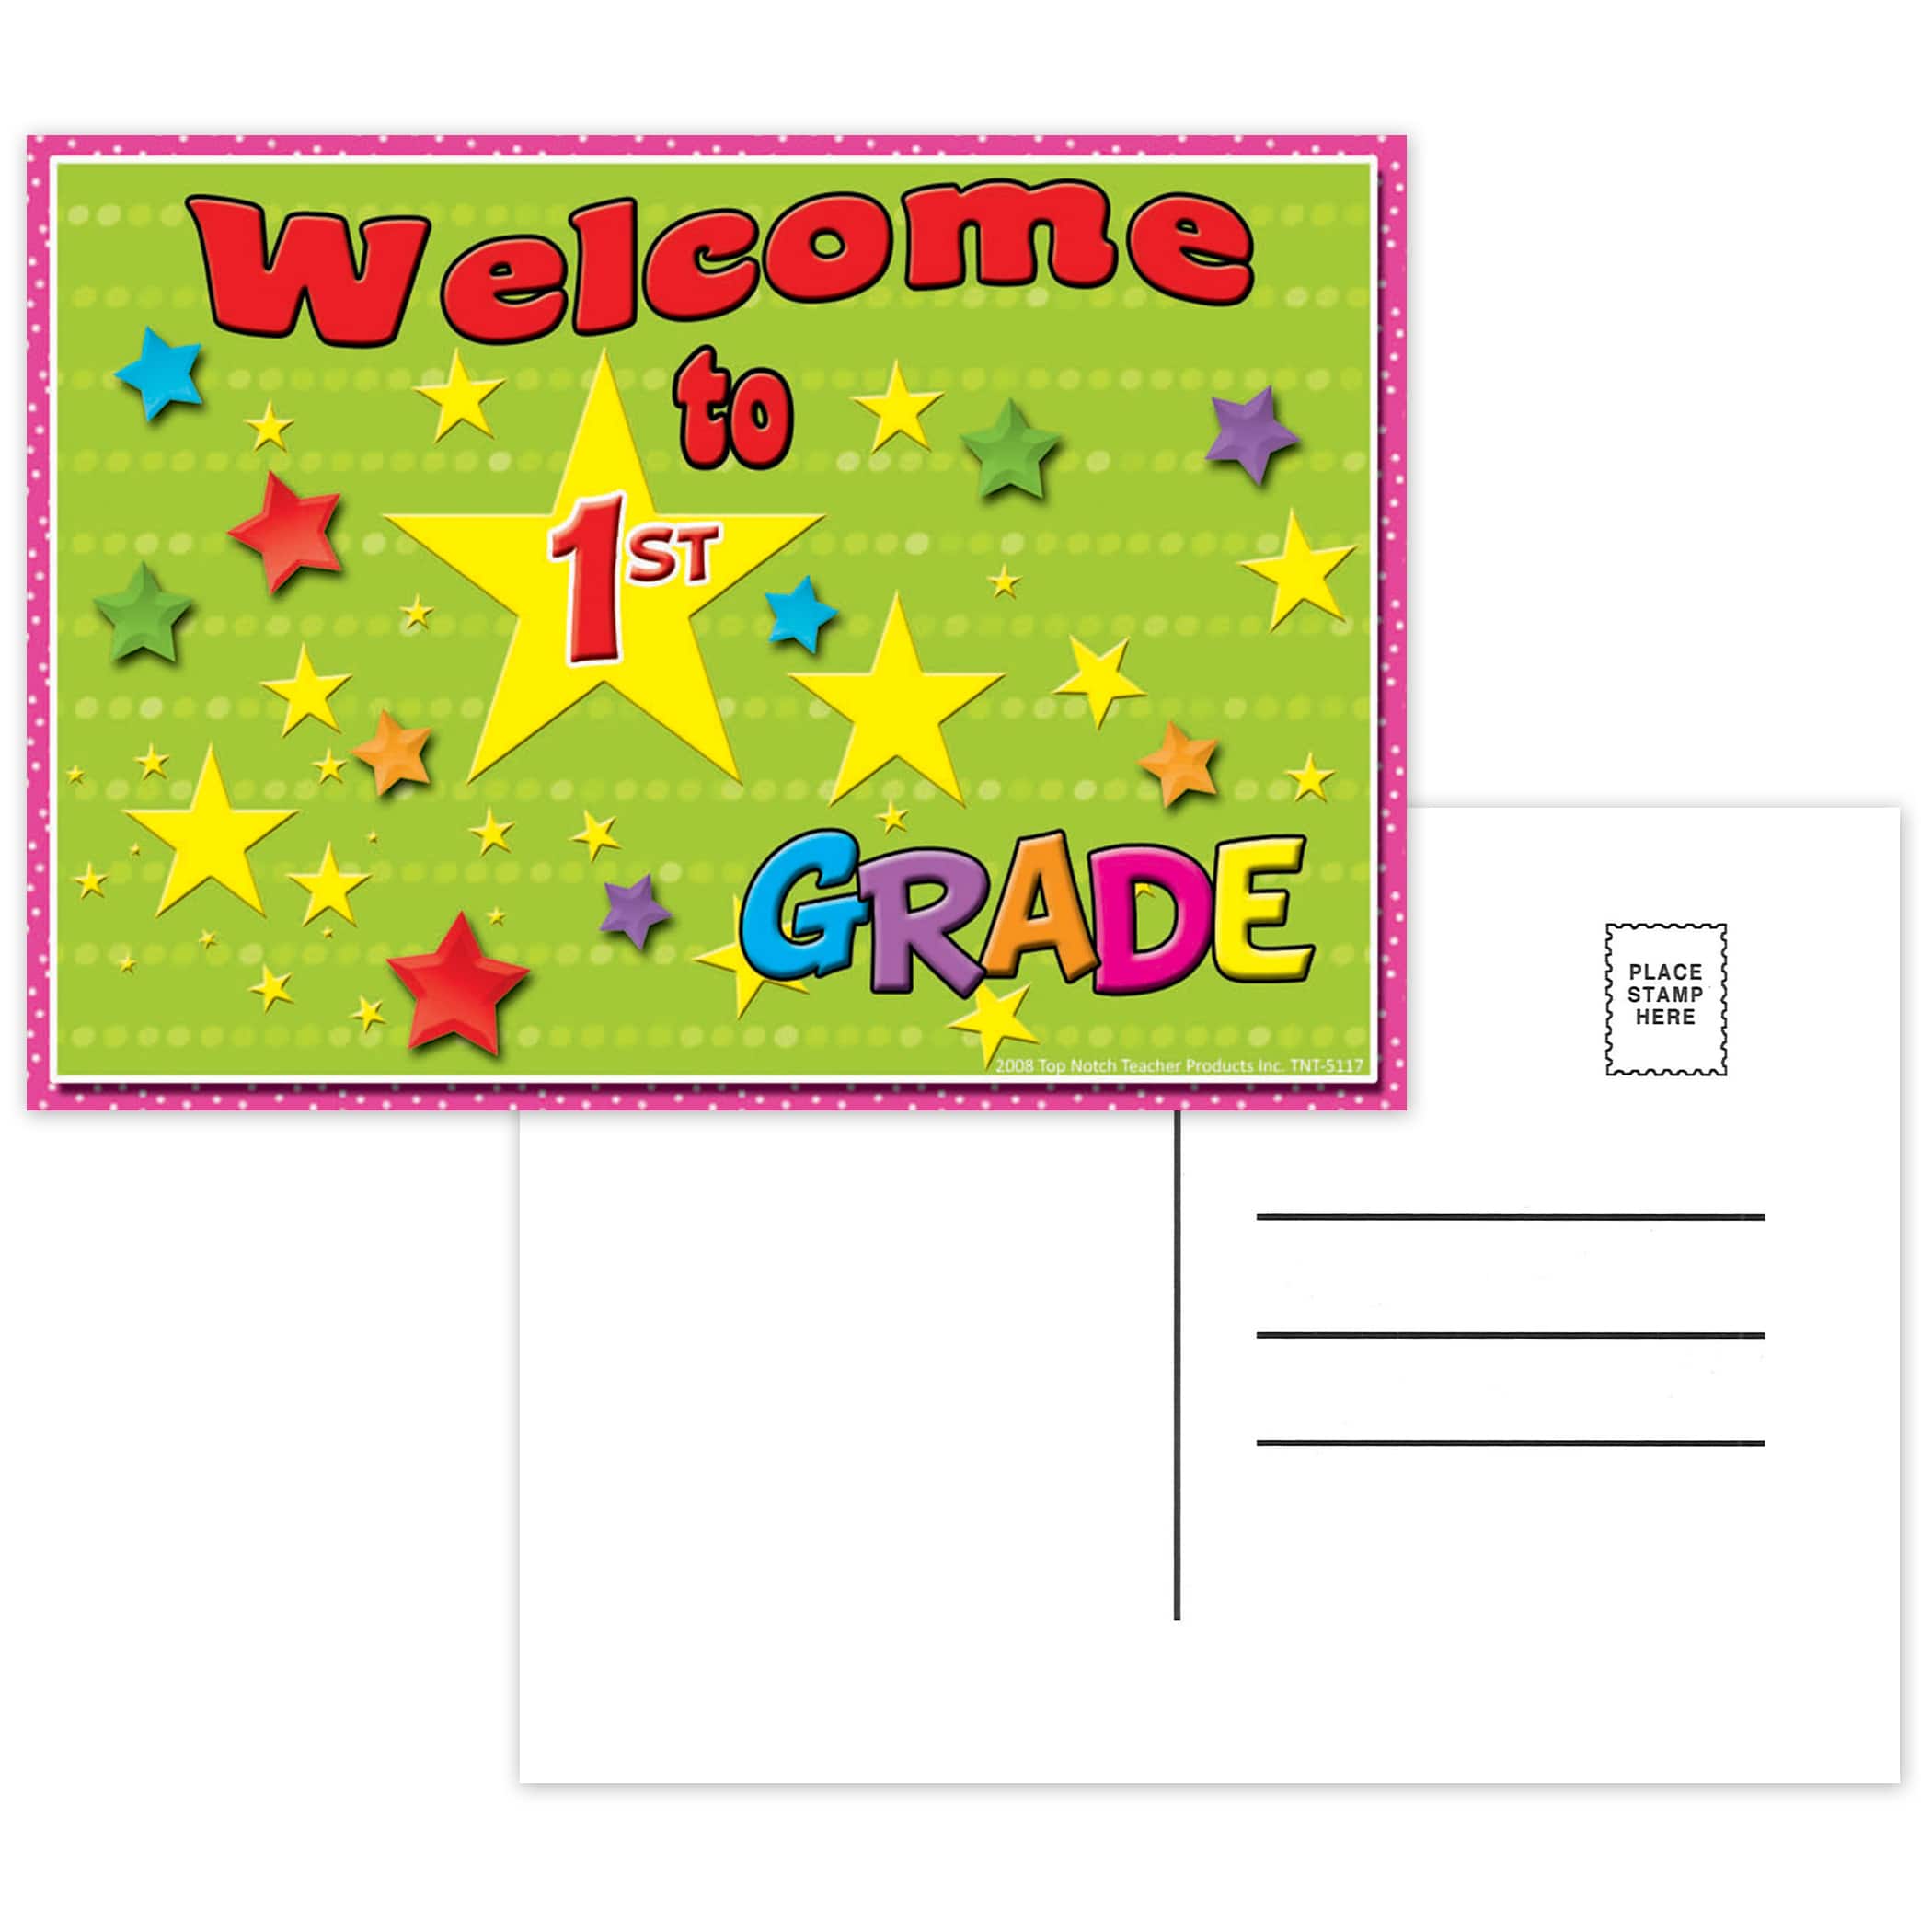 Postcards Welcome To 1st Grade, 12 packs total